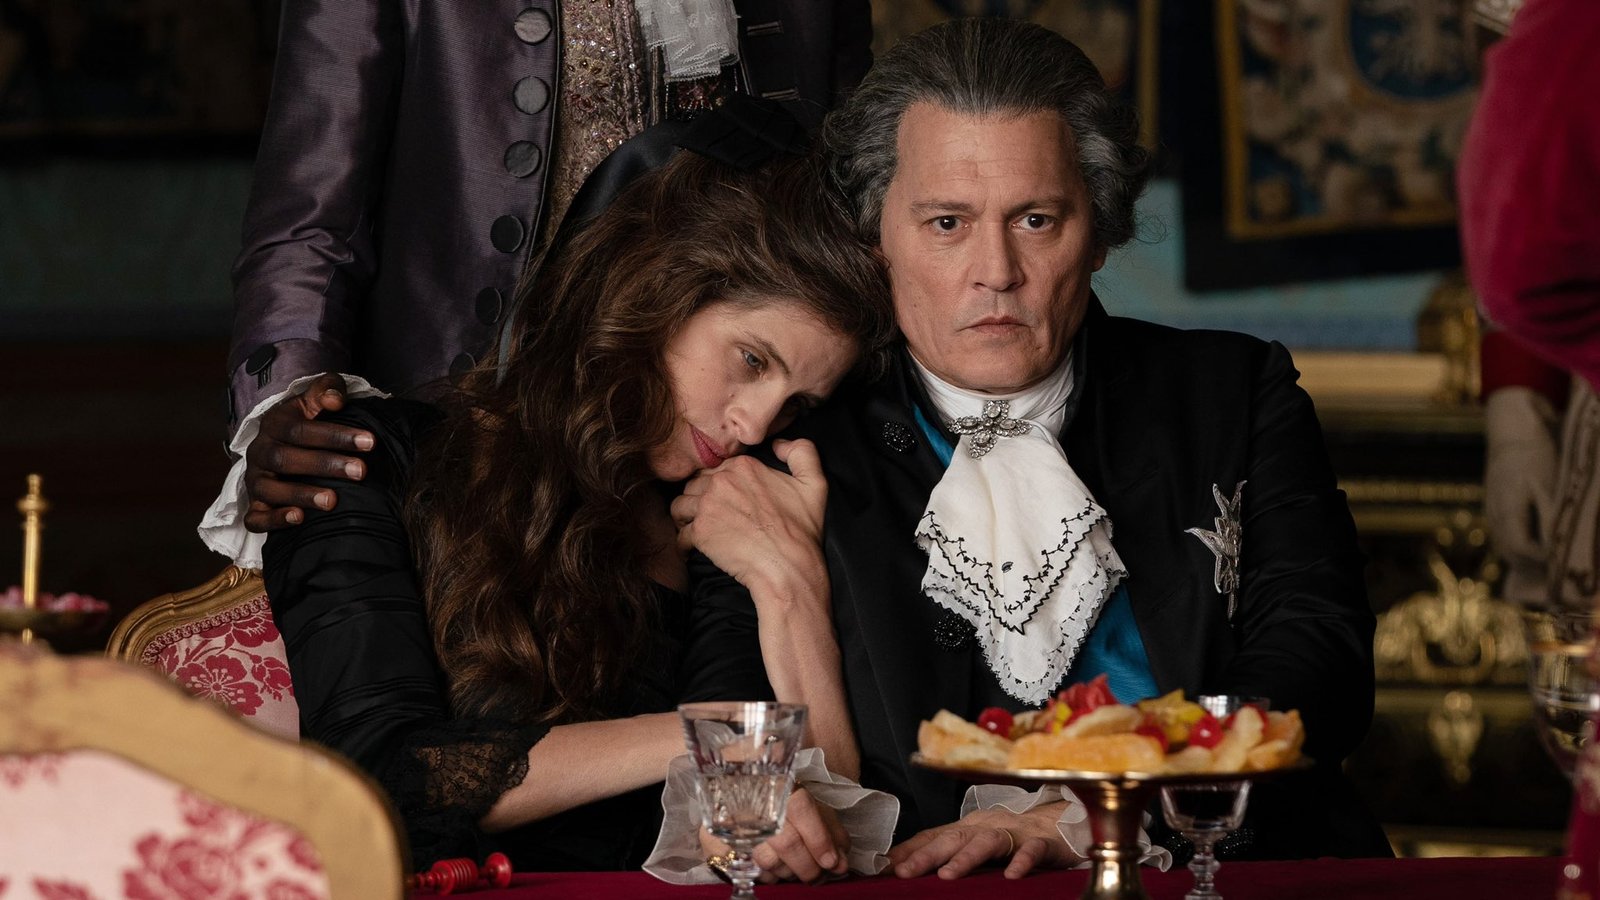 When Is Johnny Depp’s Jeanne du Barry Coming To Netflix?